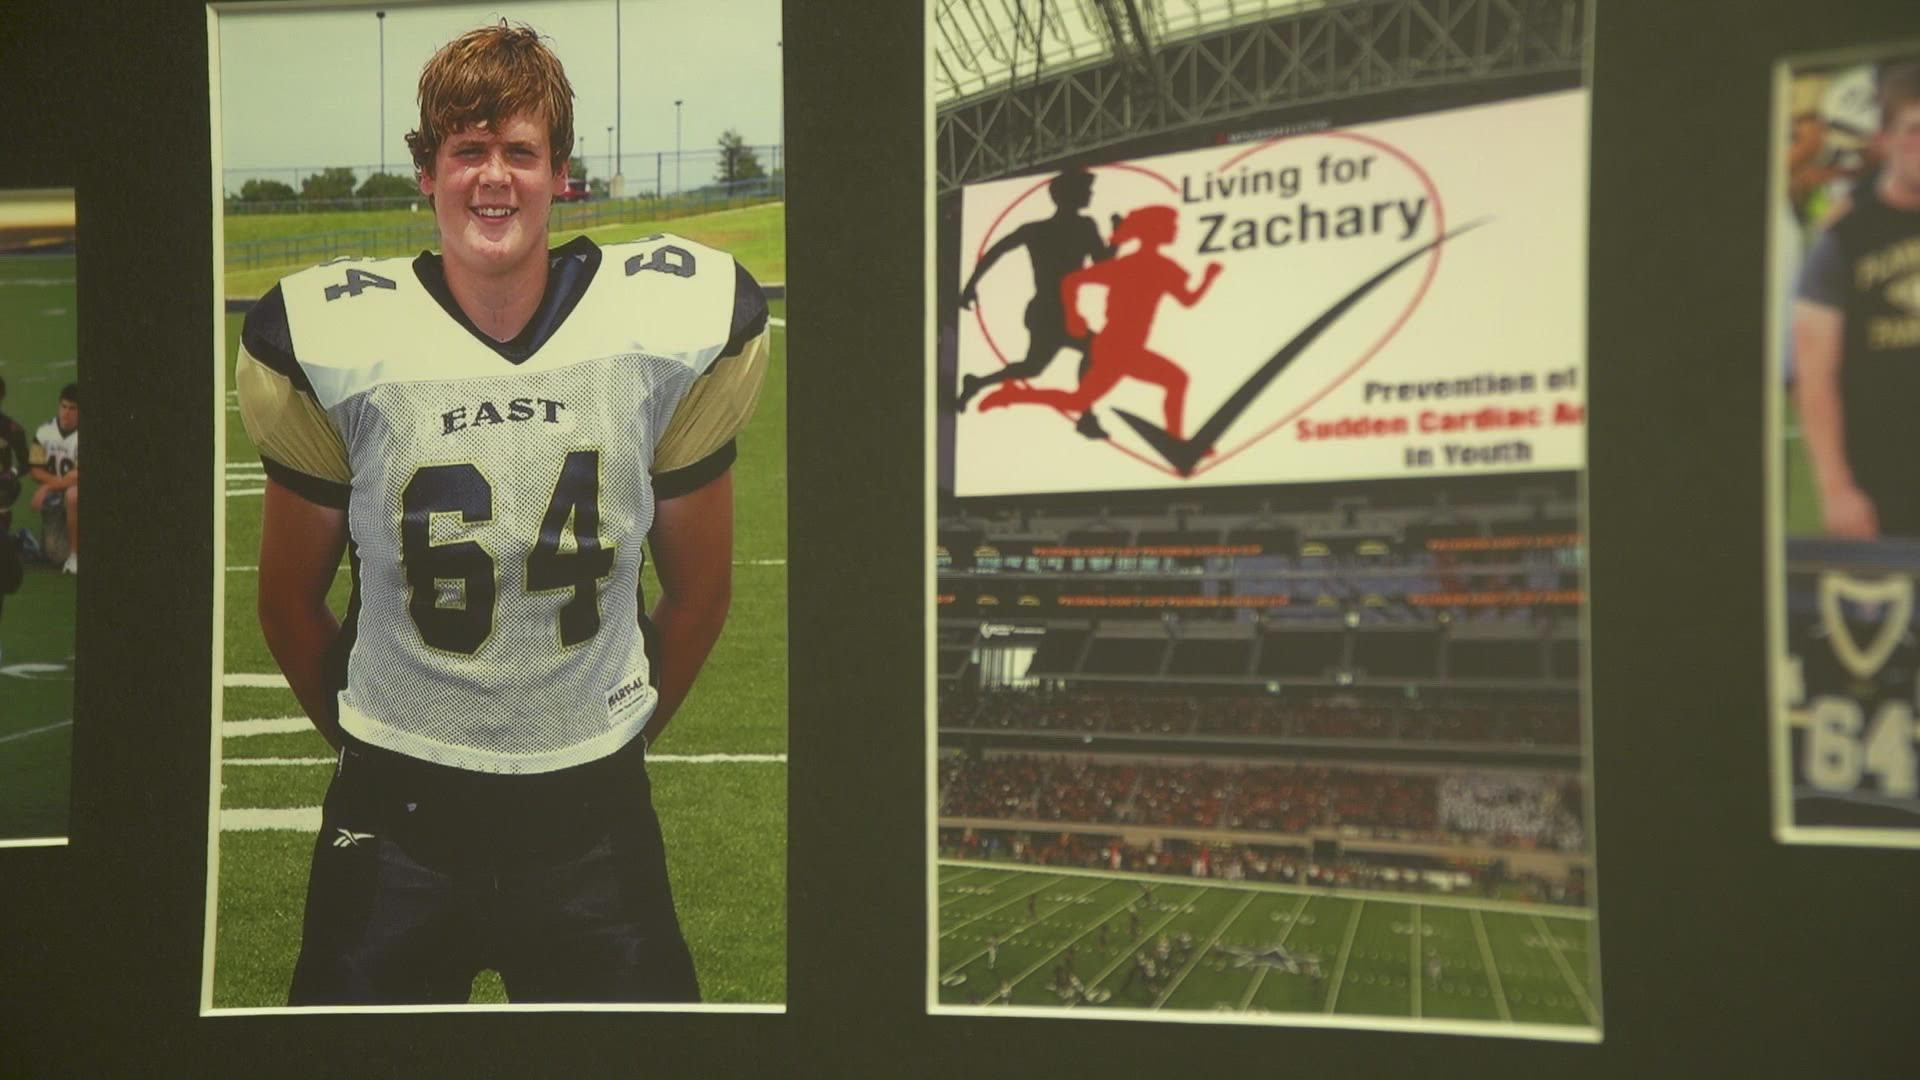 It was just 13 years ago when Zachary Schrah collapsed on the field at Plano East High School campus.